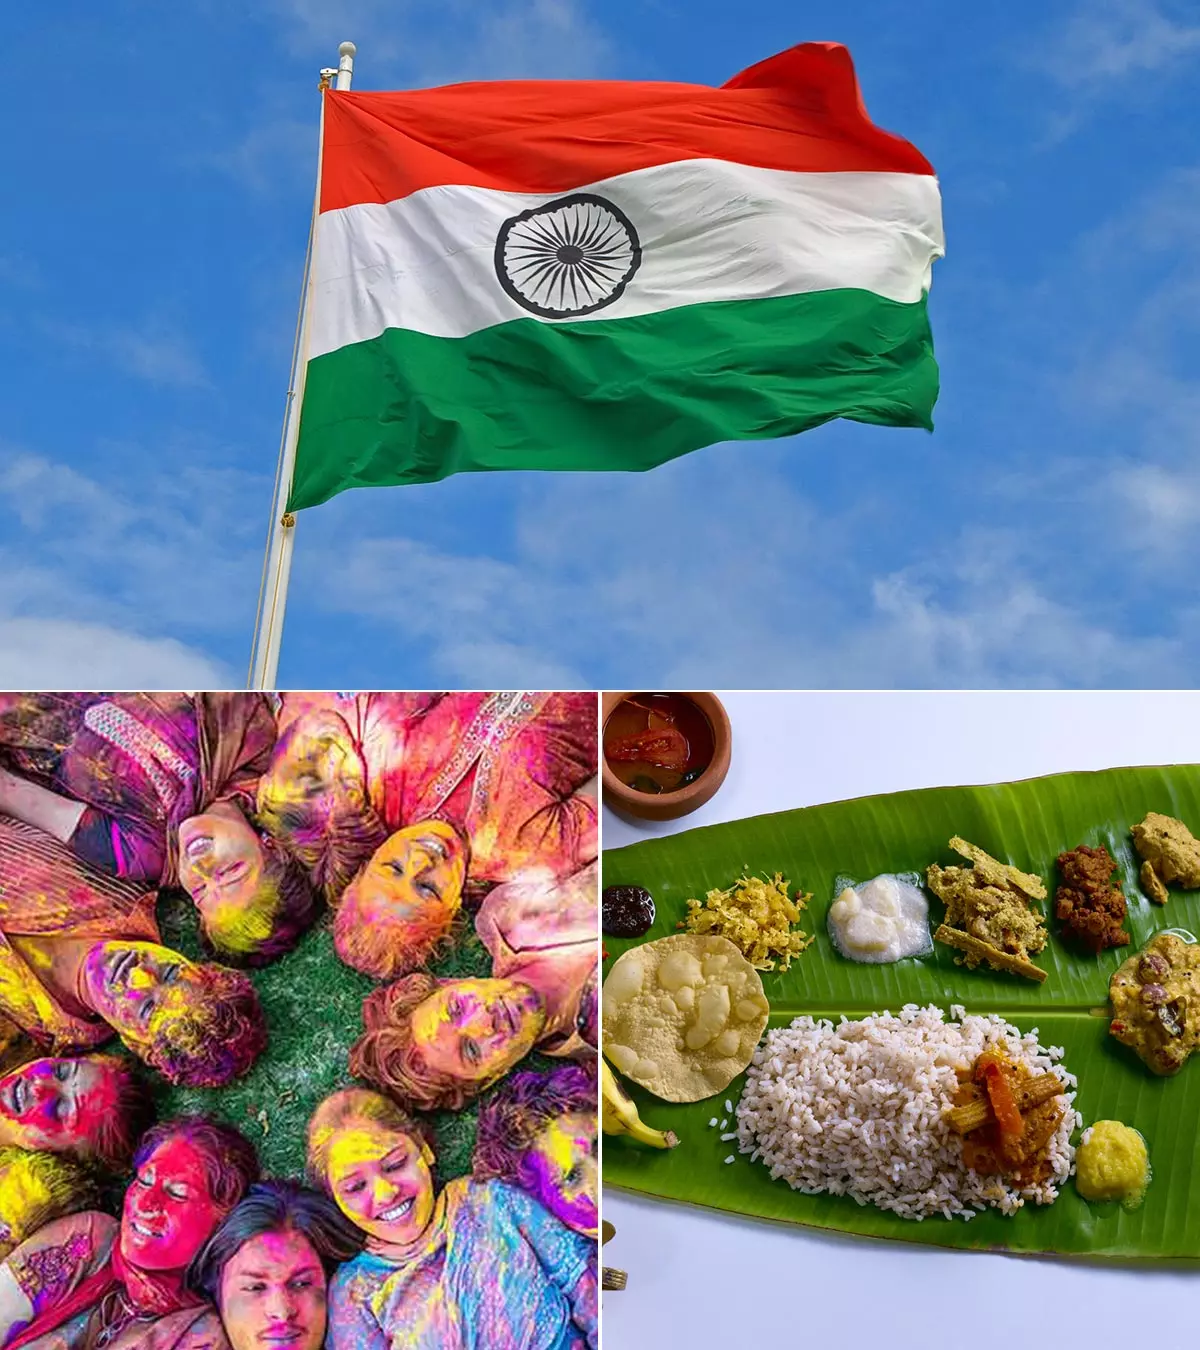 81 Interesting Facts About India For Kids To Appreciate